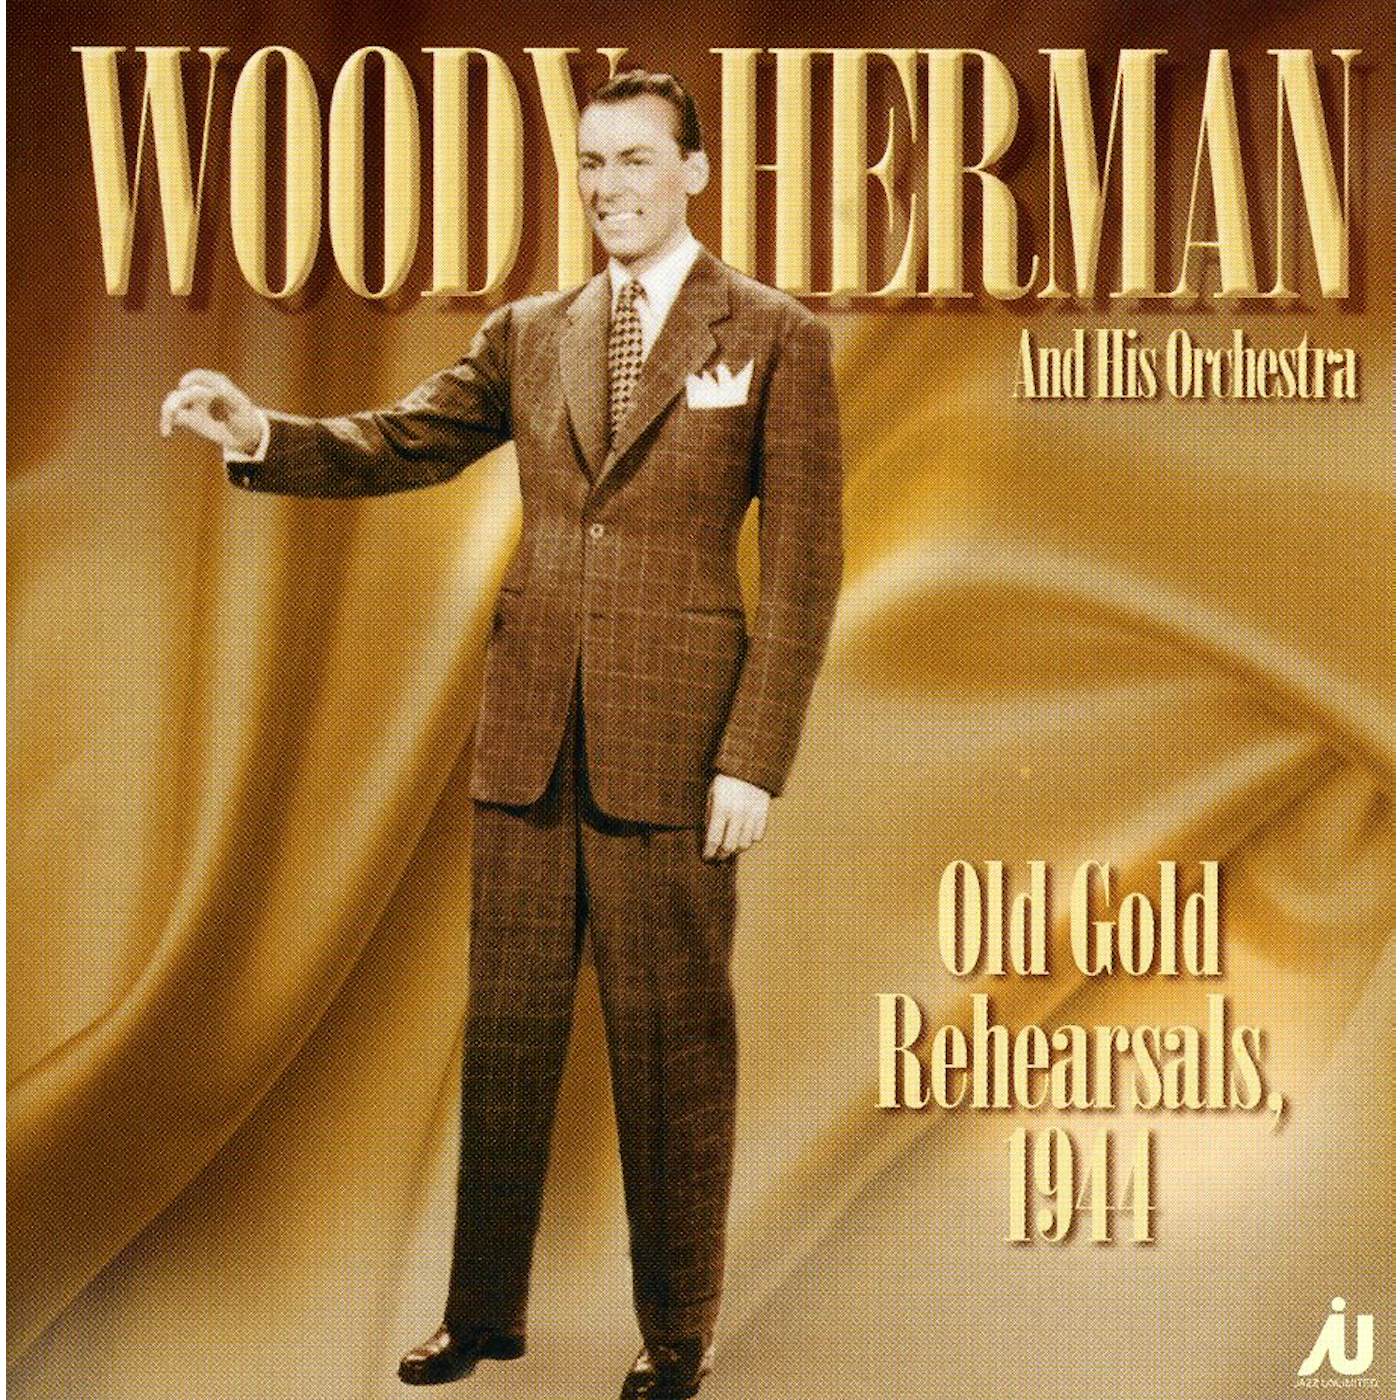 Woody Herman OLD GOLD REHEARSALS 1944 CD